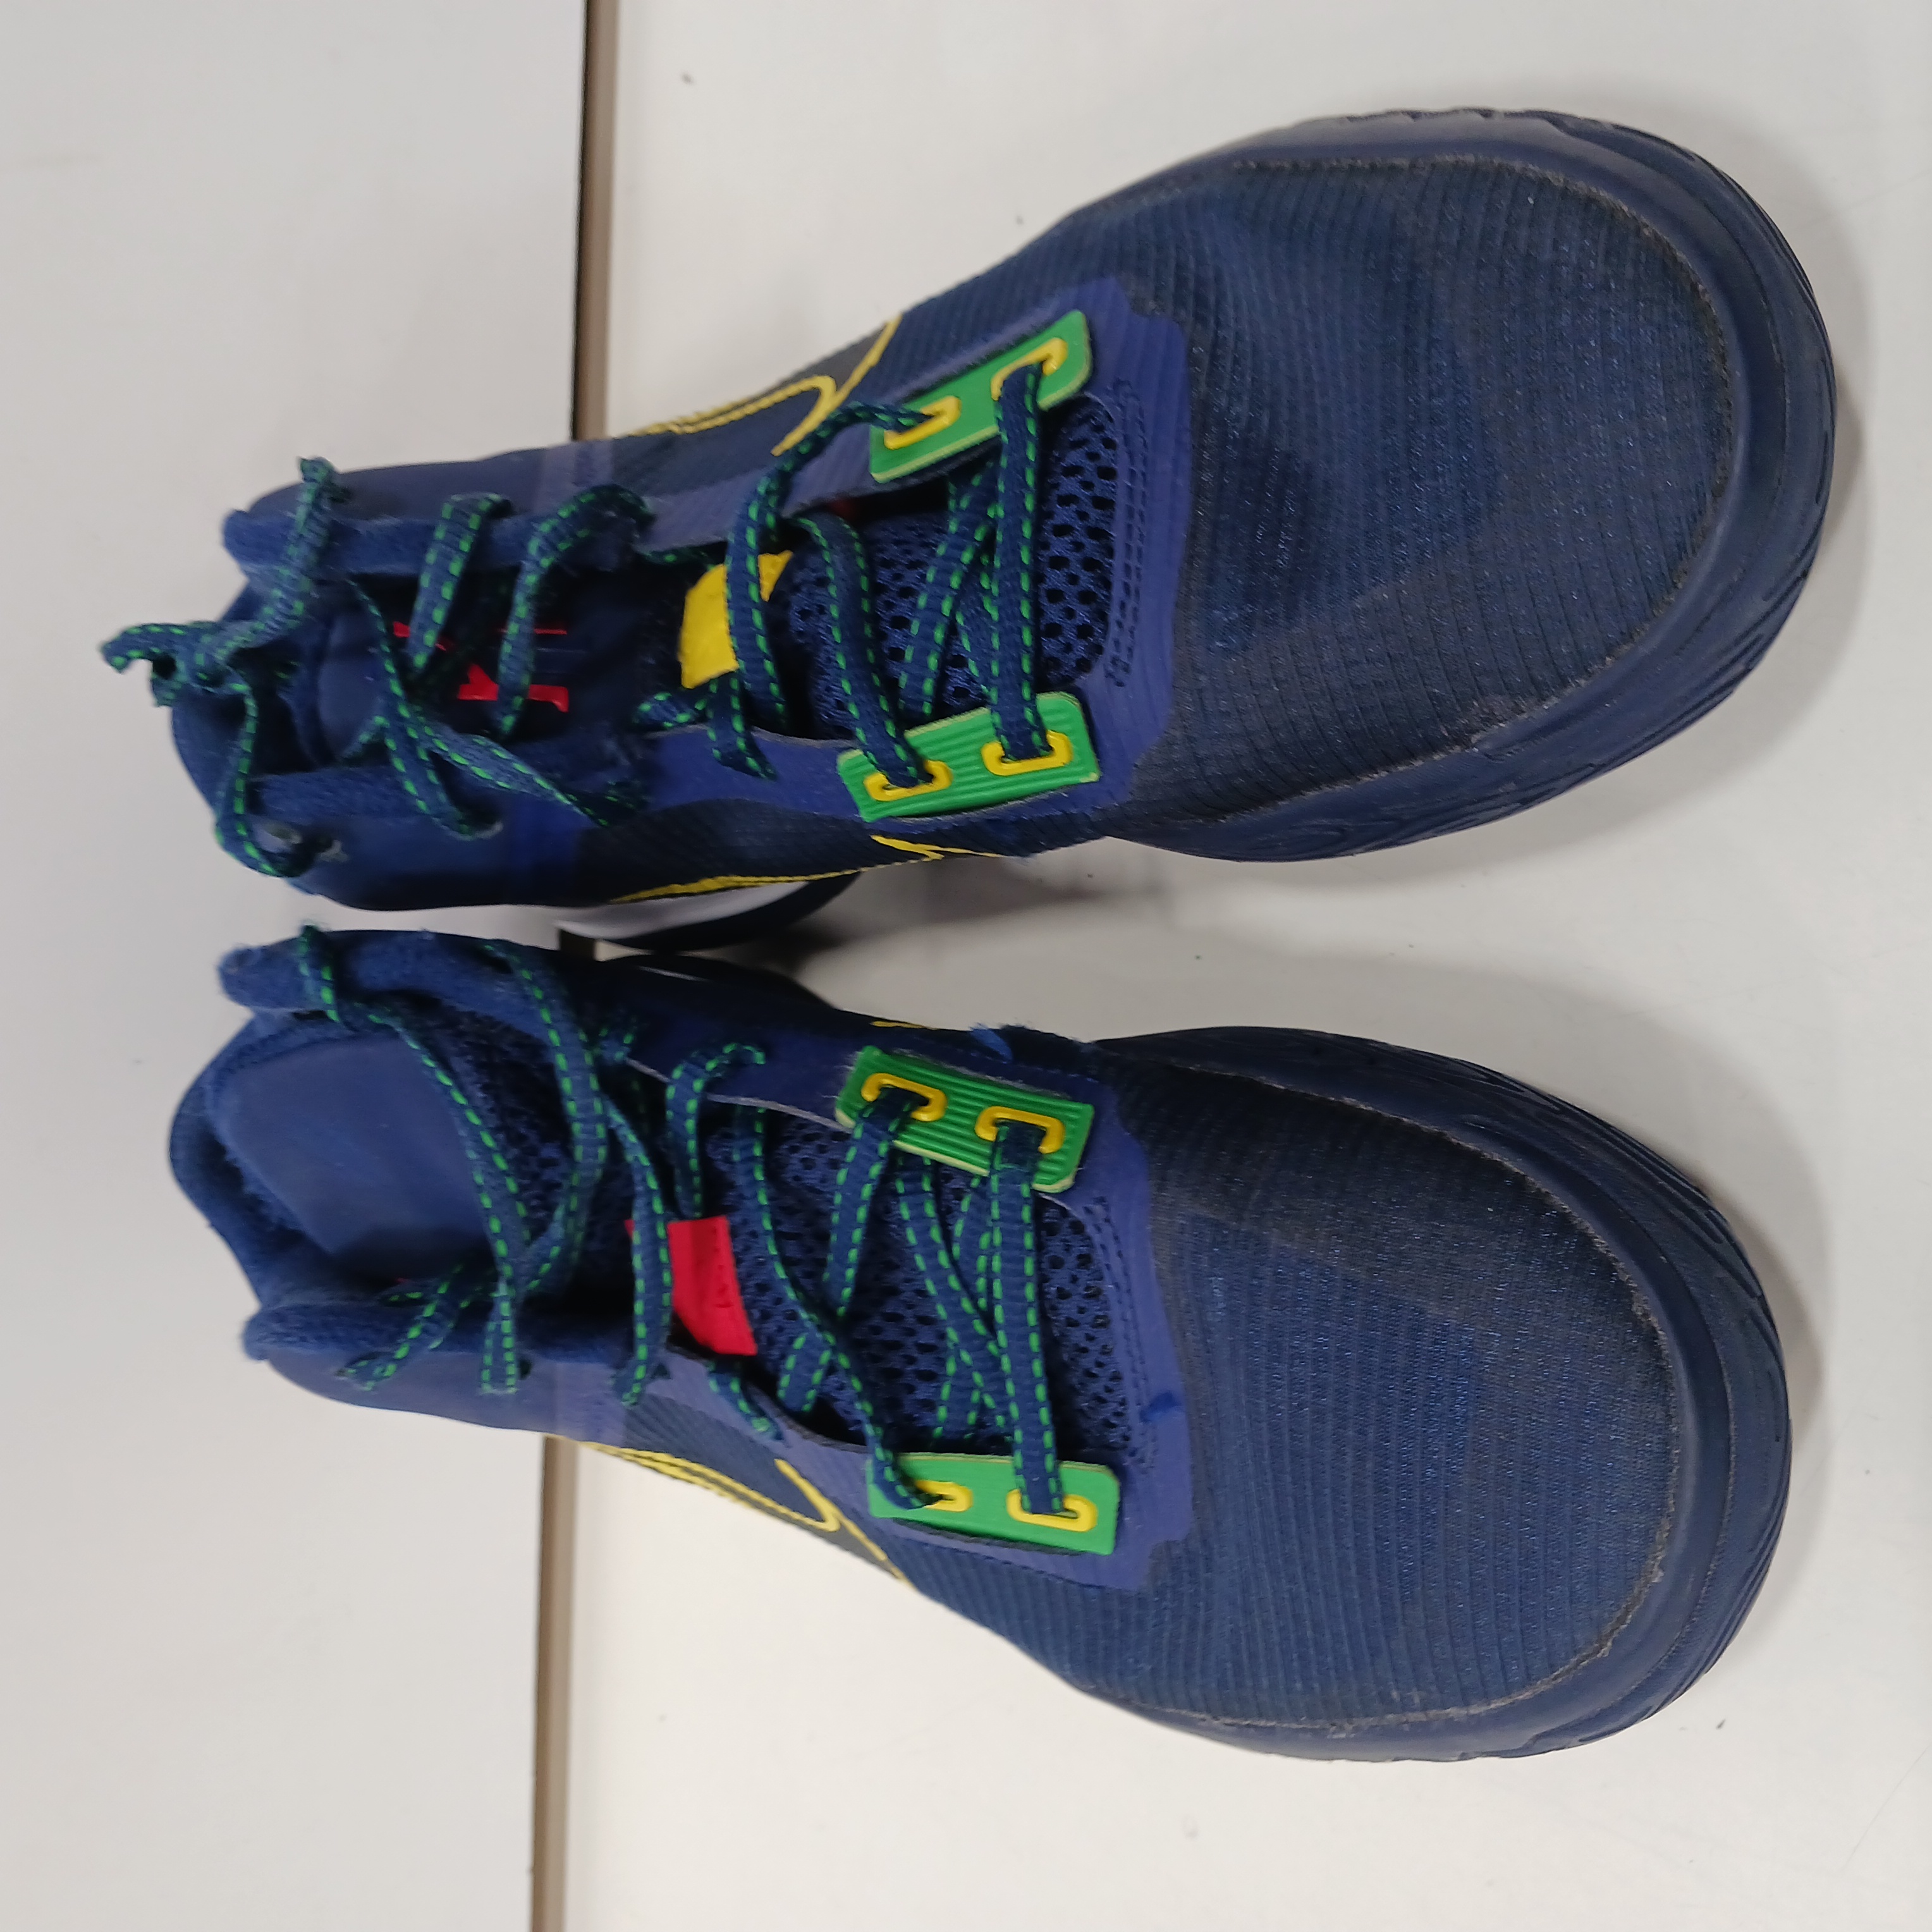 Buy the Nike Men's Blue Shoes Size 7.5 | GoodwillFinds